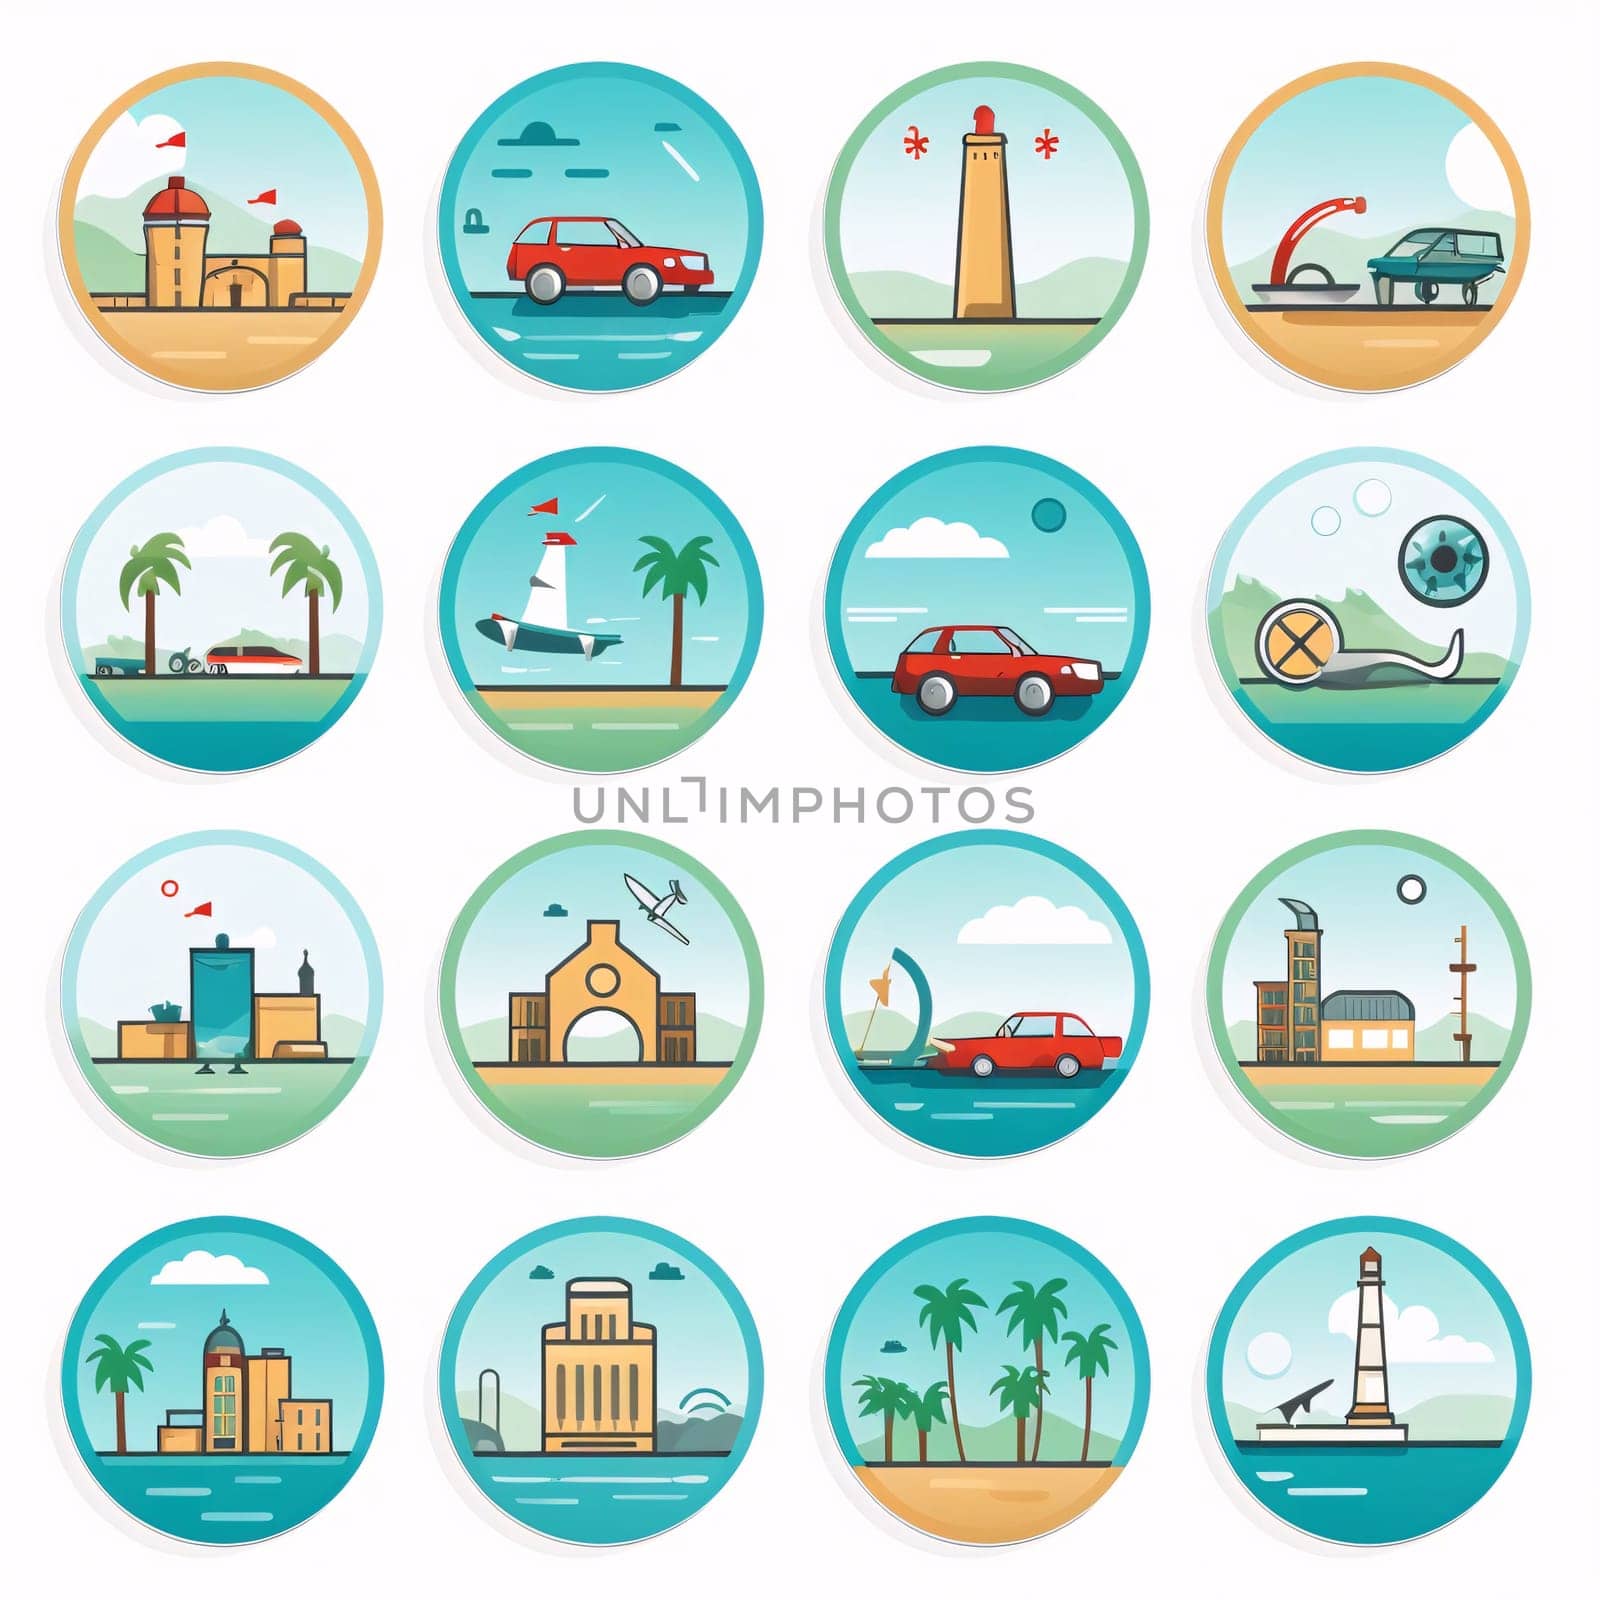 New icons collection: Set of travel icons in flat style. Vector illustration with lighthouse, car, beach, palm trees, car, ship, sea.